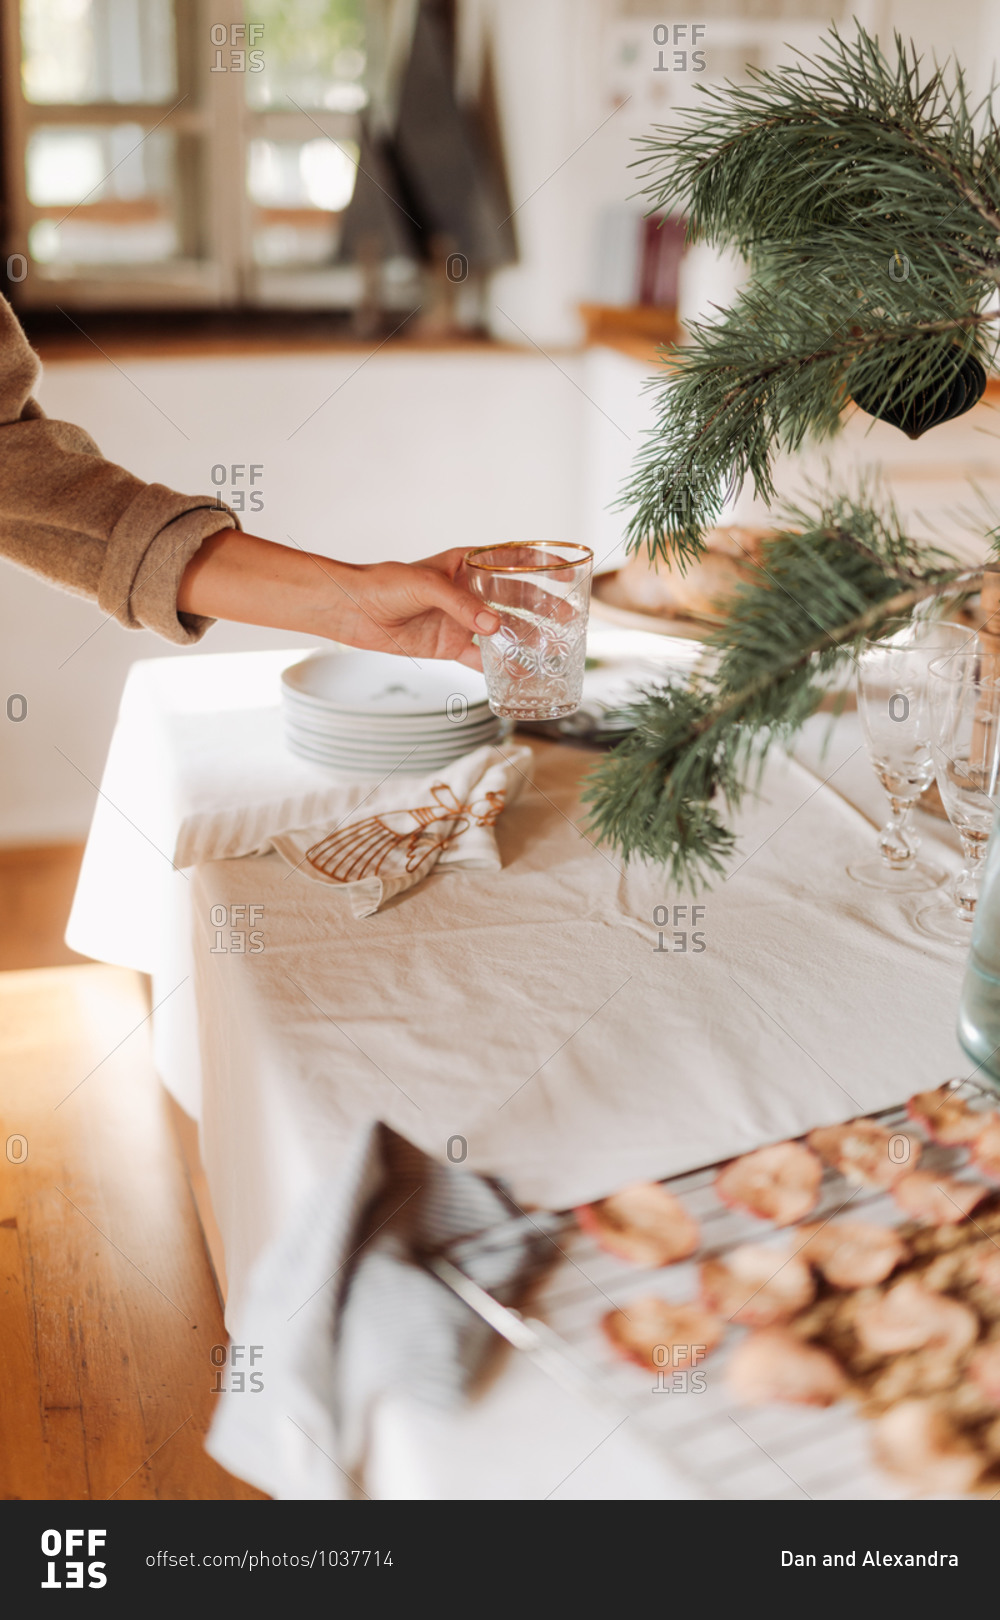 Woman placing glasses on a table being set for a holiday party